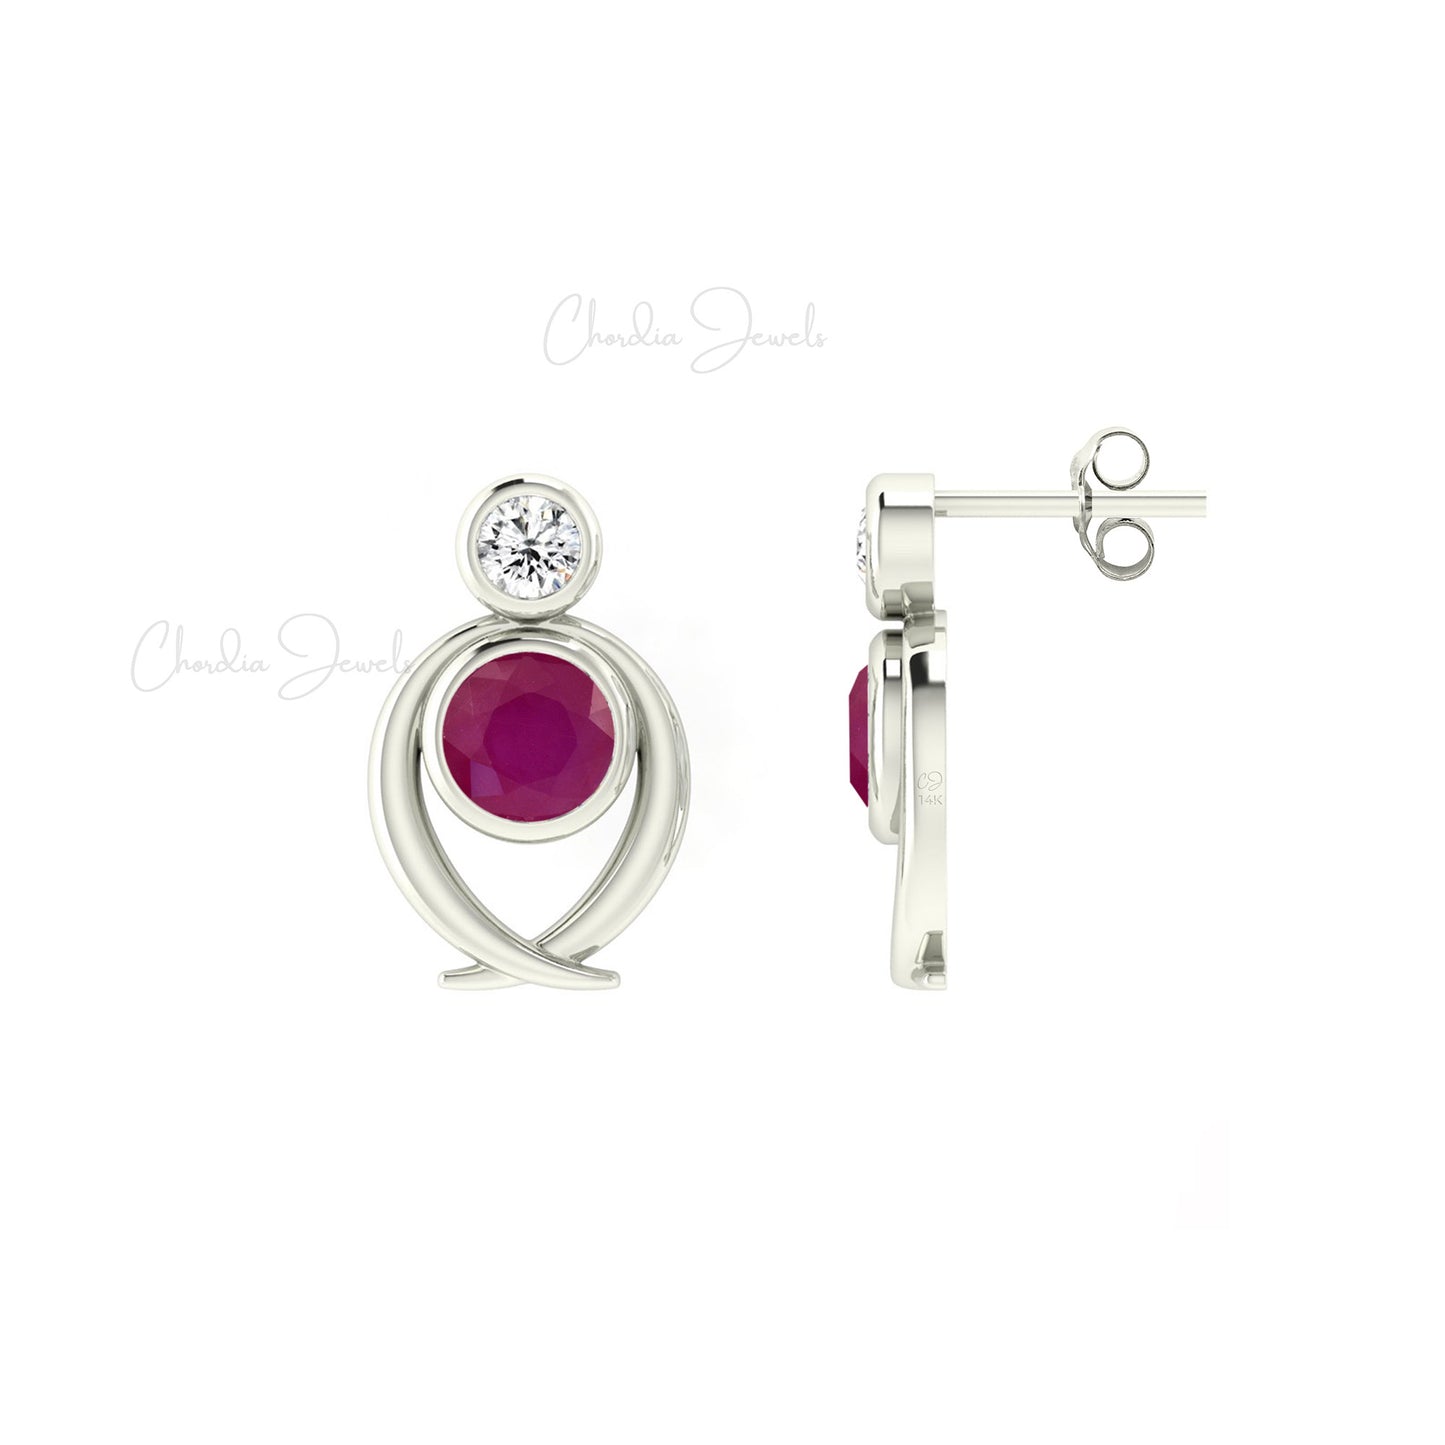 Genuine 5mm Round Cut Ruby Diamond Accented Studs Earrings in 14k Gold